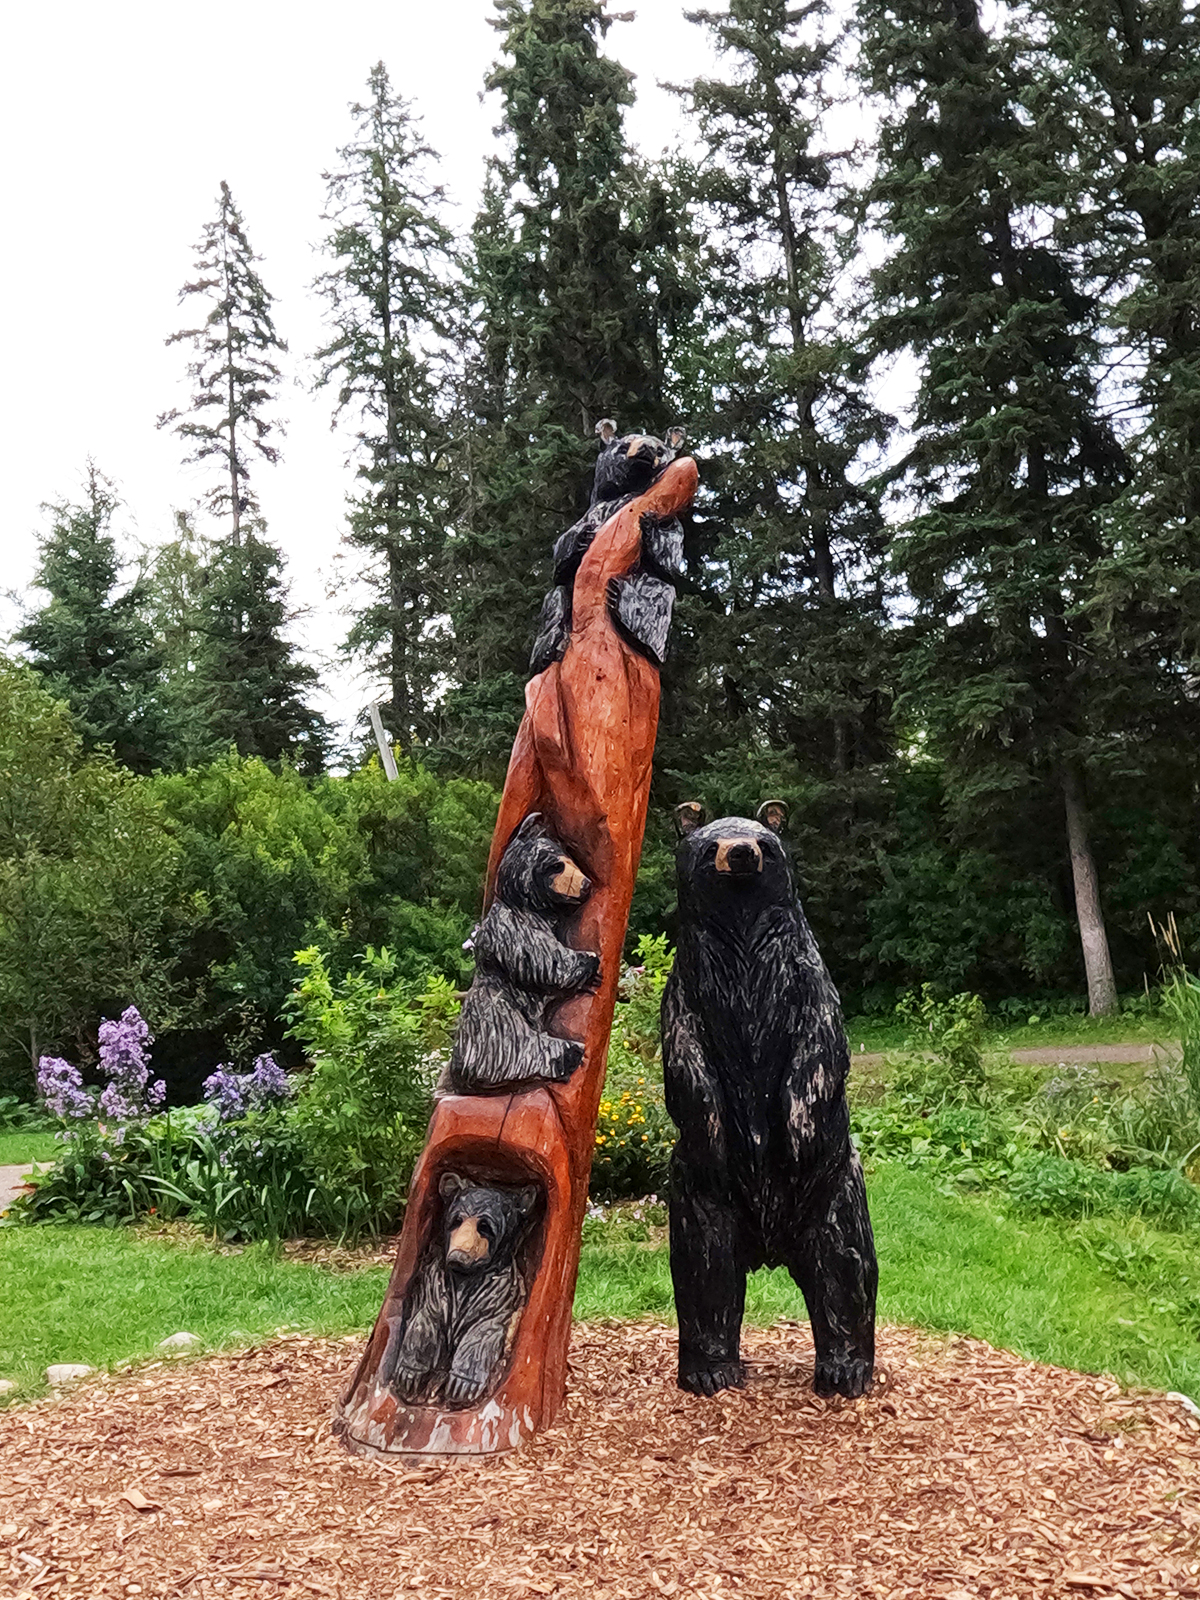 bear carved statue in wood setting